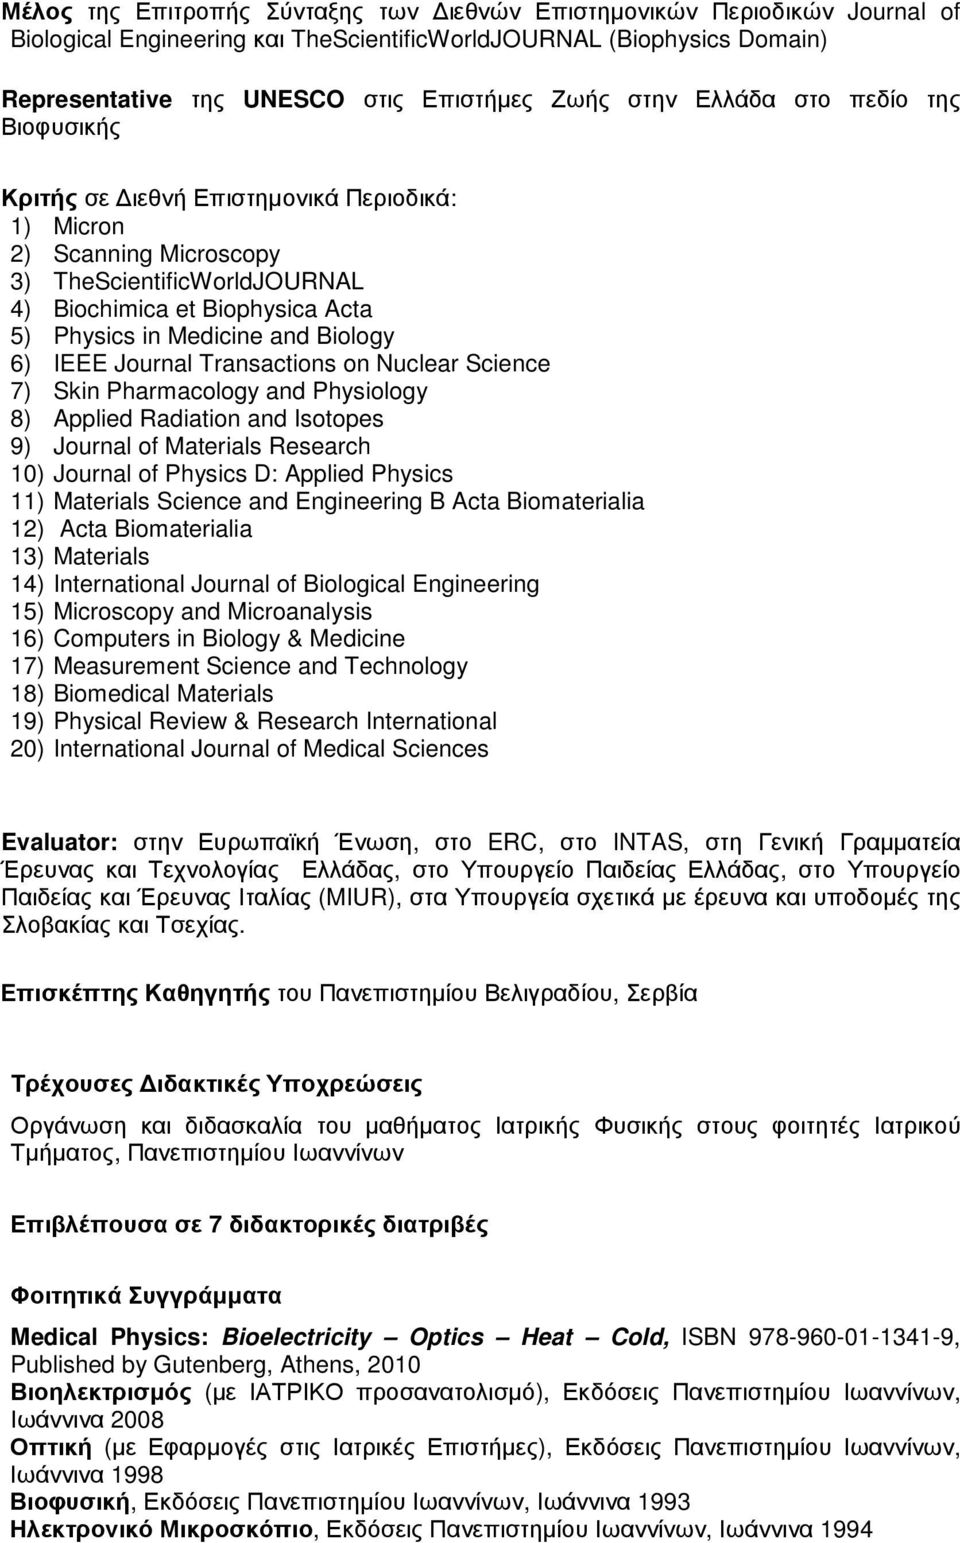 Biology 6) IEEE Journal Transactions on Nuclear Science 7) Skin Pharmacology and Physiology 8) Applied Radiation and Isotopes 9) Journal of Materials Research 10) Journal of Physics D: Applied